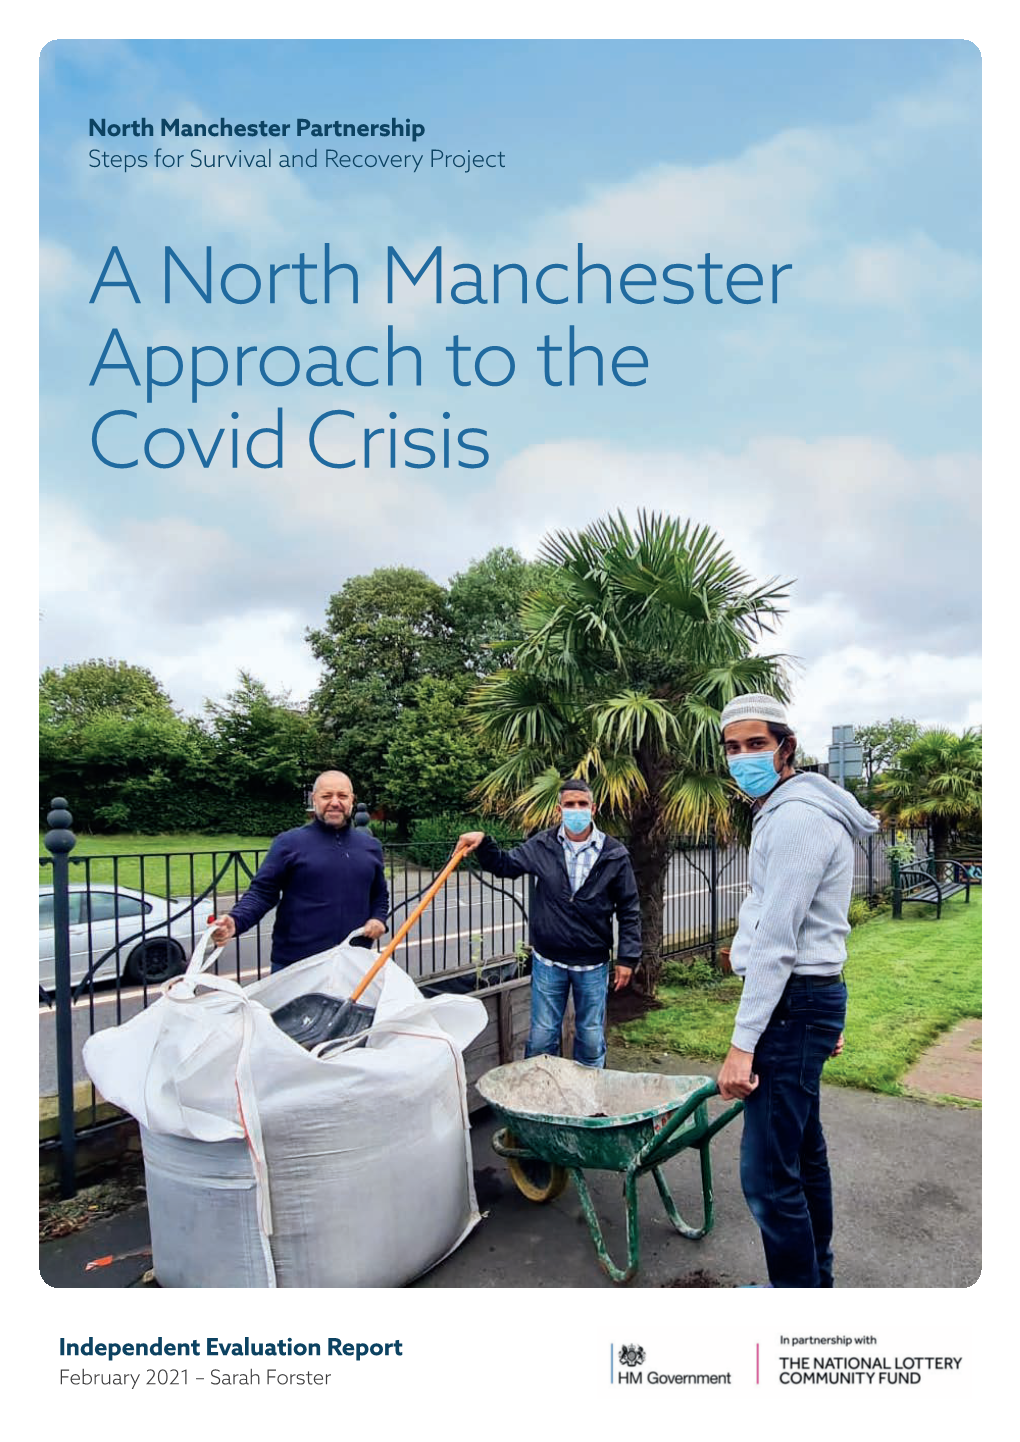 A North Manchester Approach to the Covid Crisis